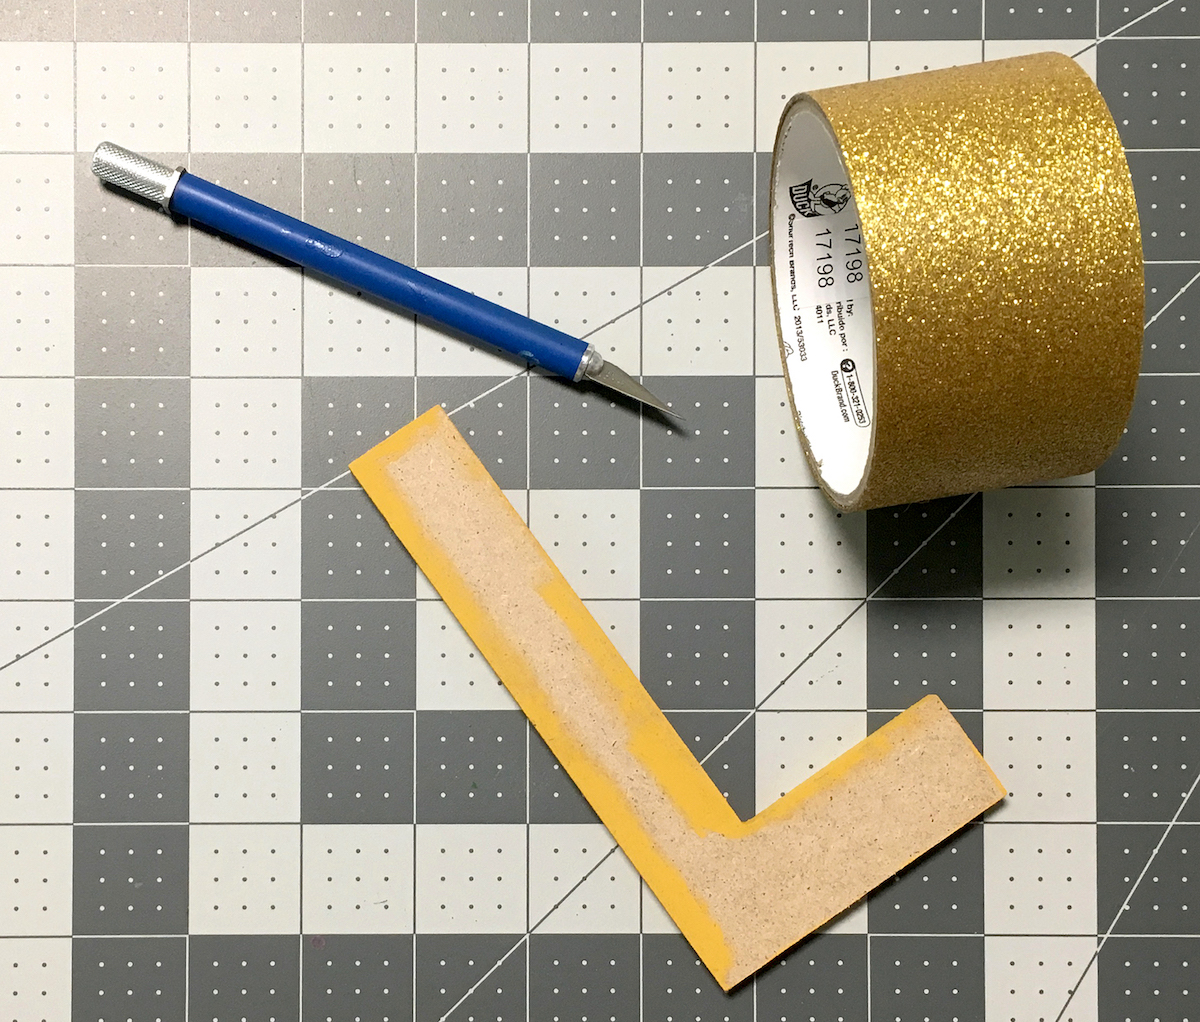 Painted wood letter, Gold Duck Tape, and a craft knife